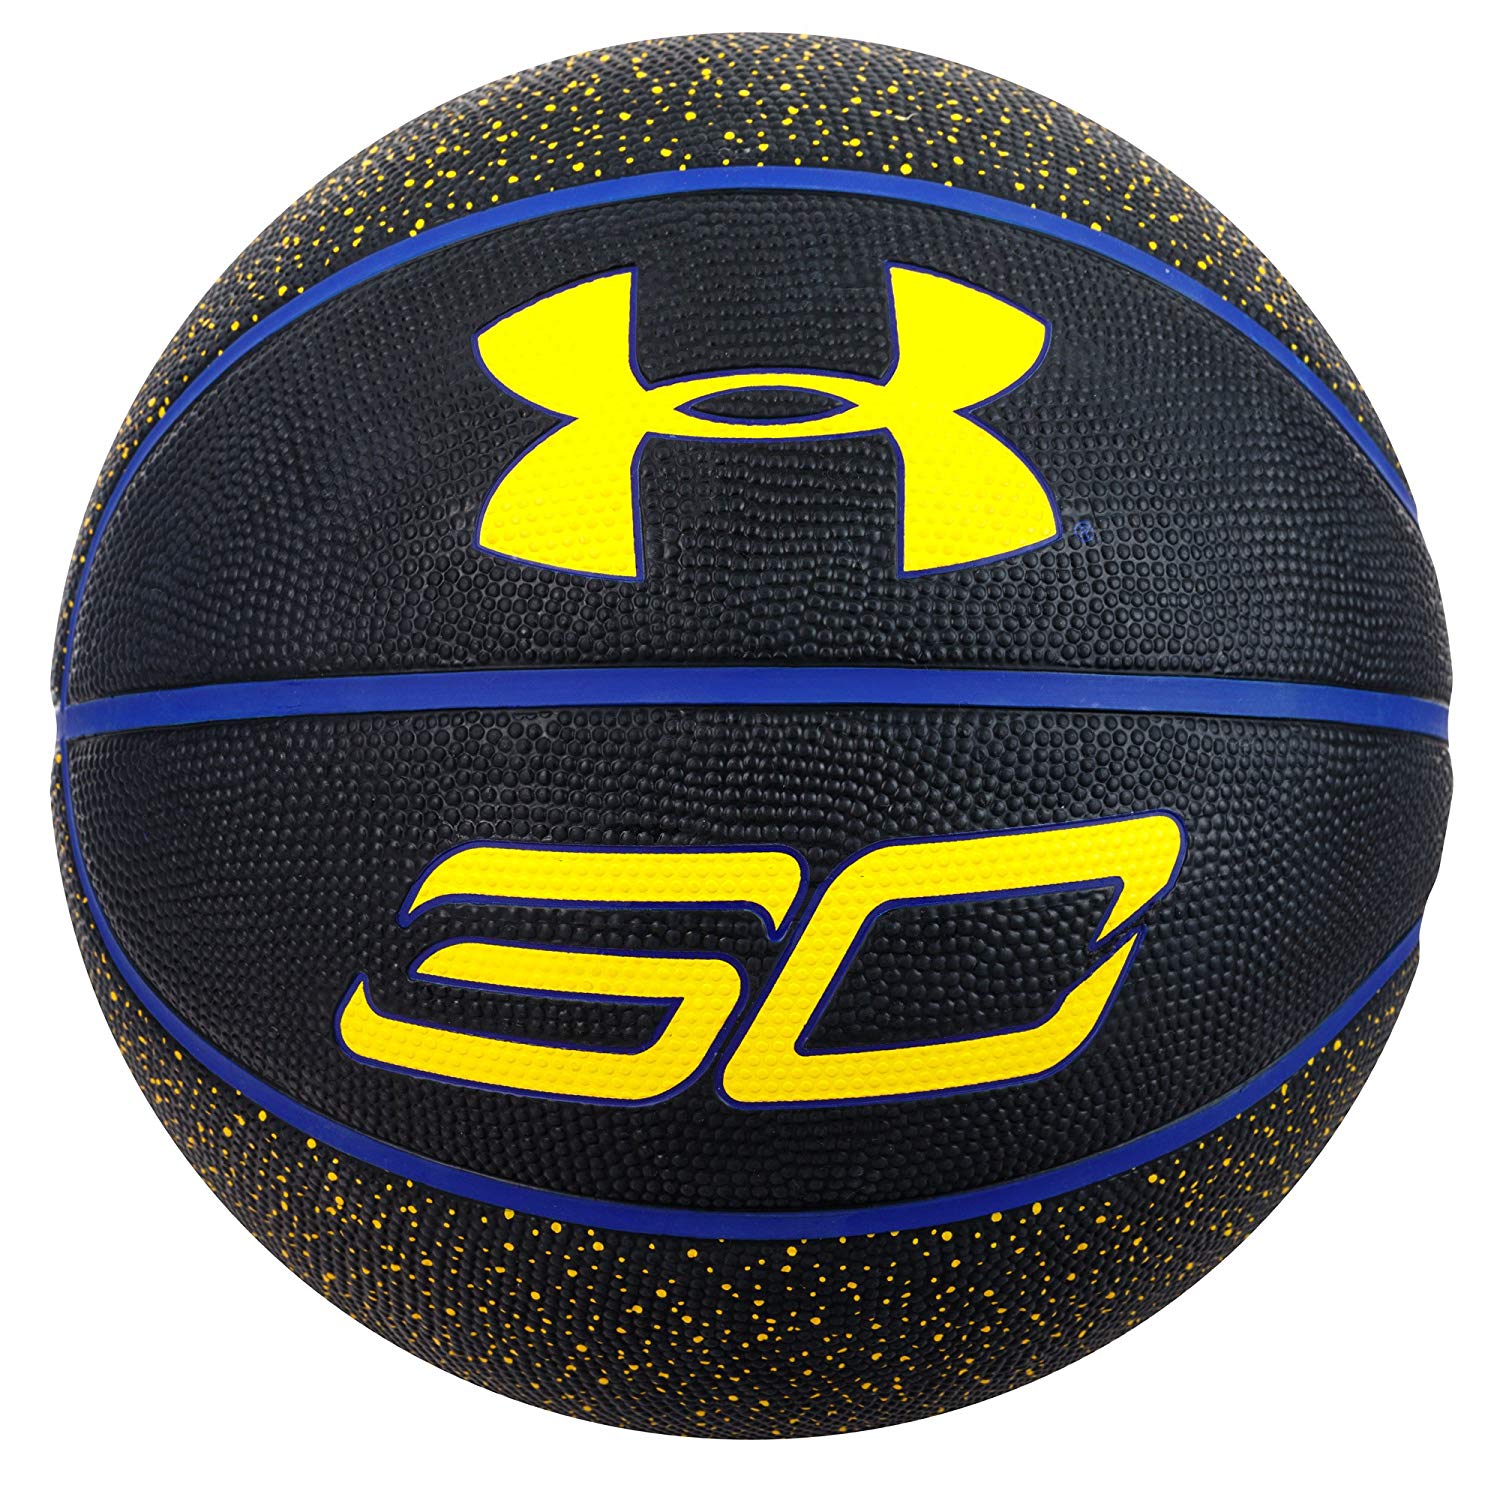 Stephen Curry Logo - Amazon.com : Under Armour Steph Curry Basketball, Official Size 7